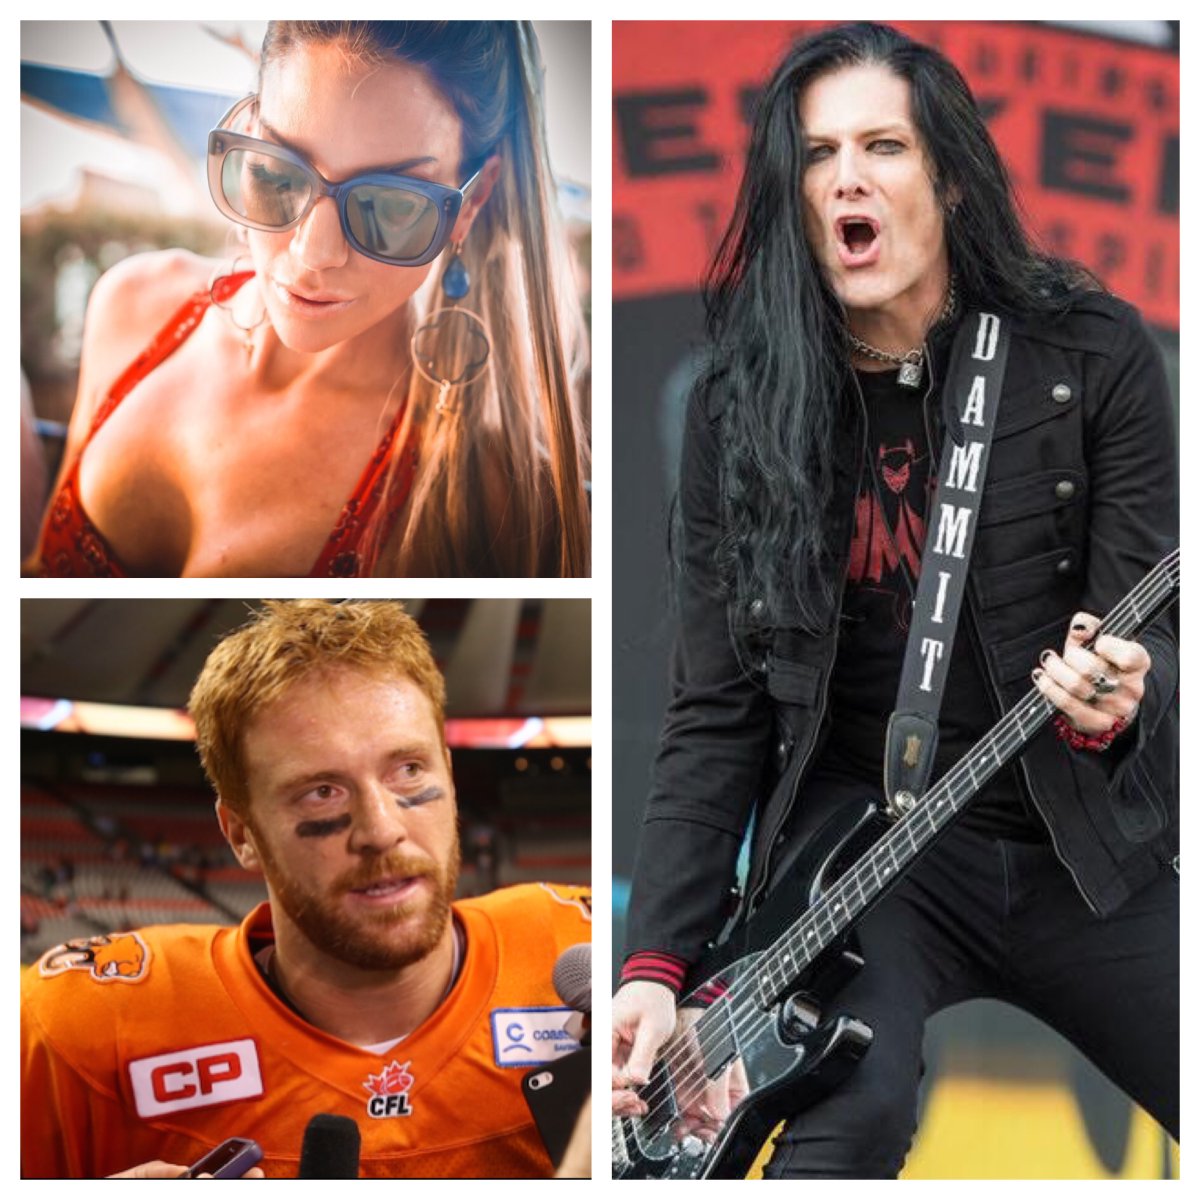 #SMKC bassist @ToddDammitKerns , retired #BCLions QB @TravisLulay & #RHOD alumni @CaryDeuber are guests of #podcast 198! ow.ly/23aJ30rOjzM